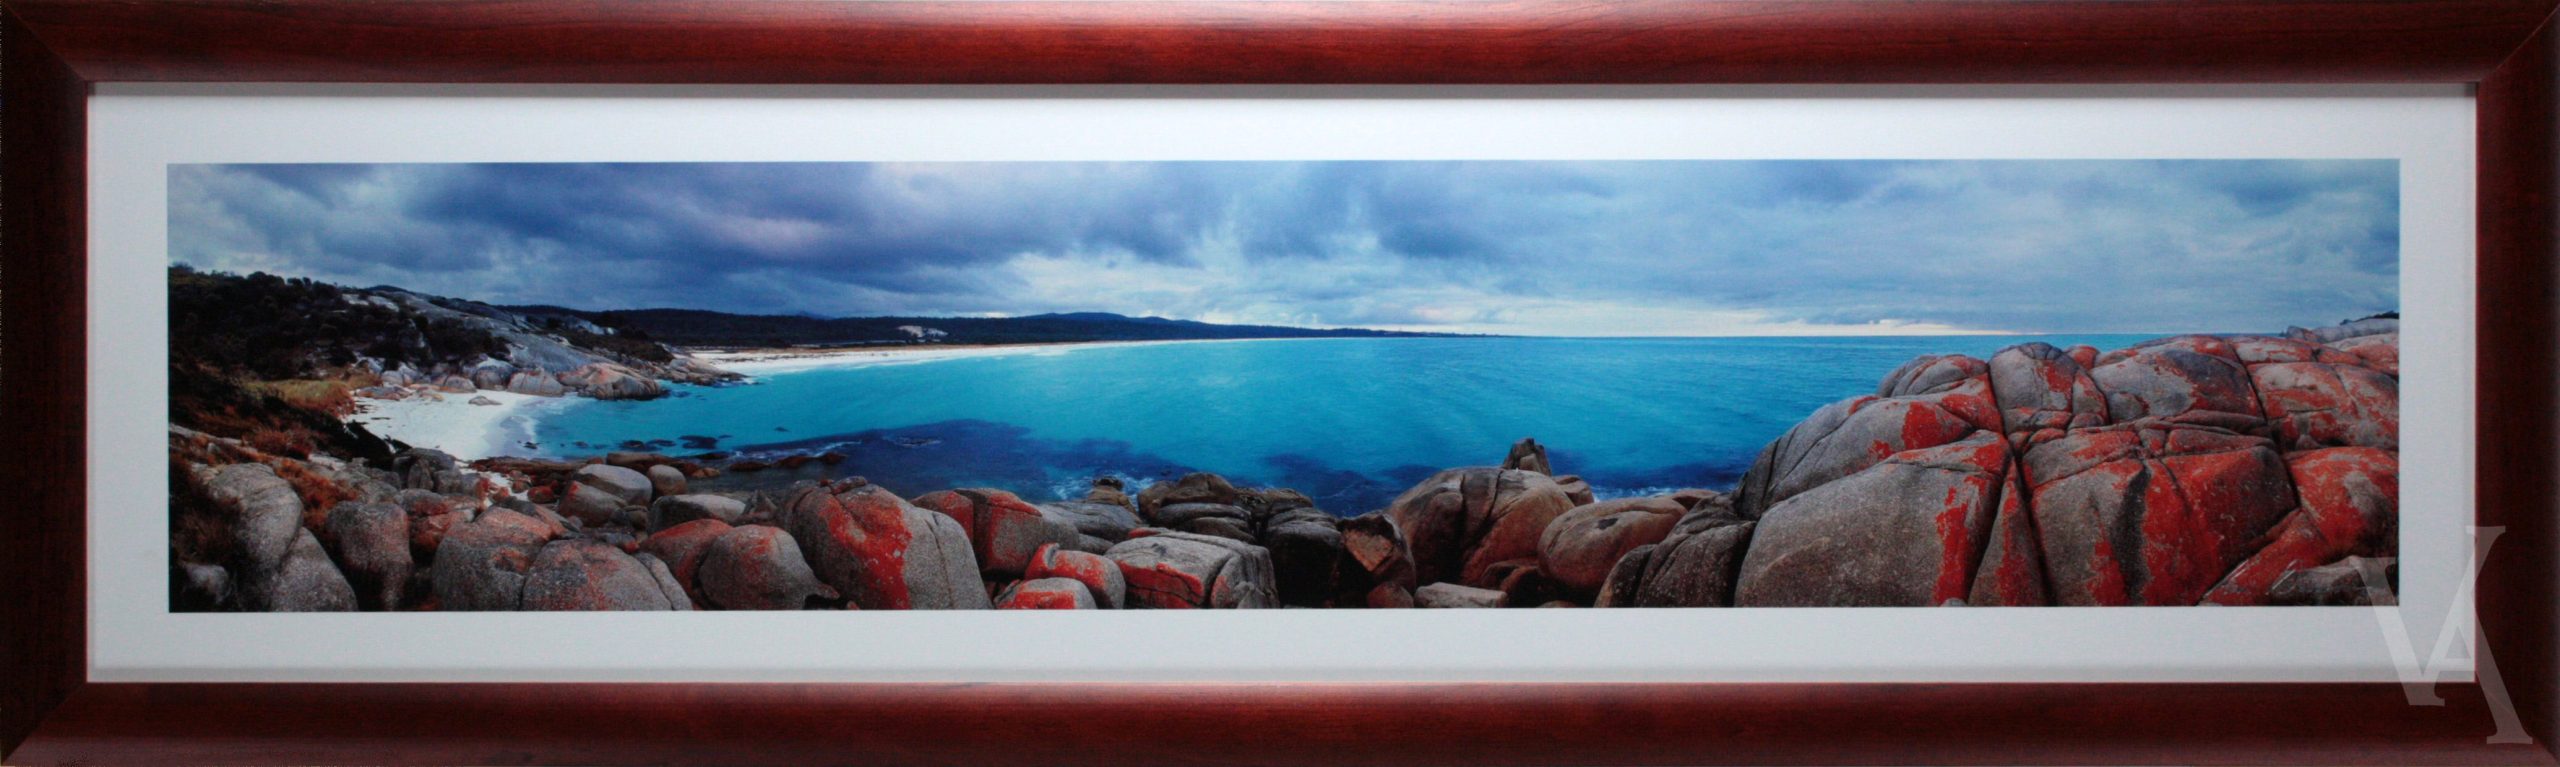 Ken Duncan Photography Framed Signature Series Art Print. Bay Of Fires Panoramic Signed Photo.